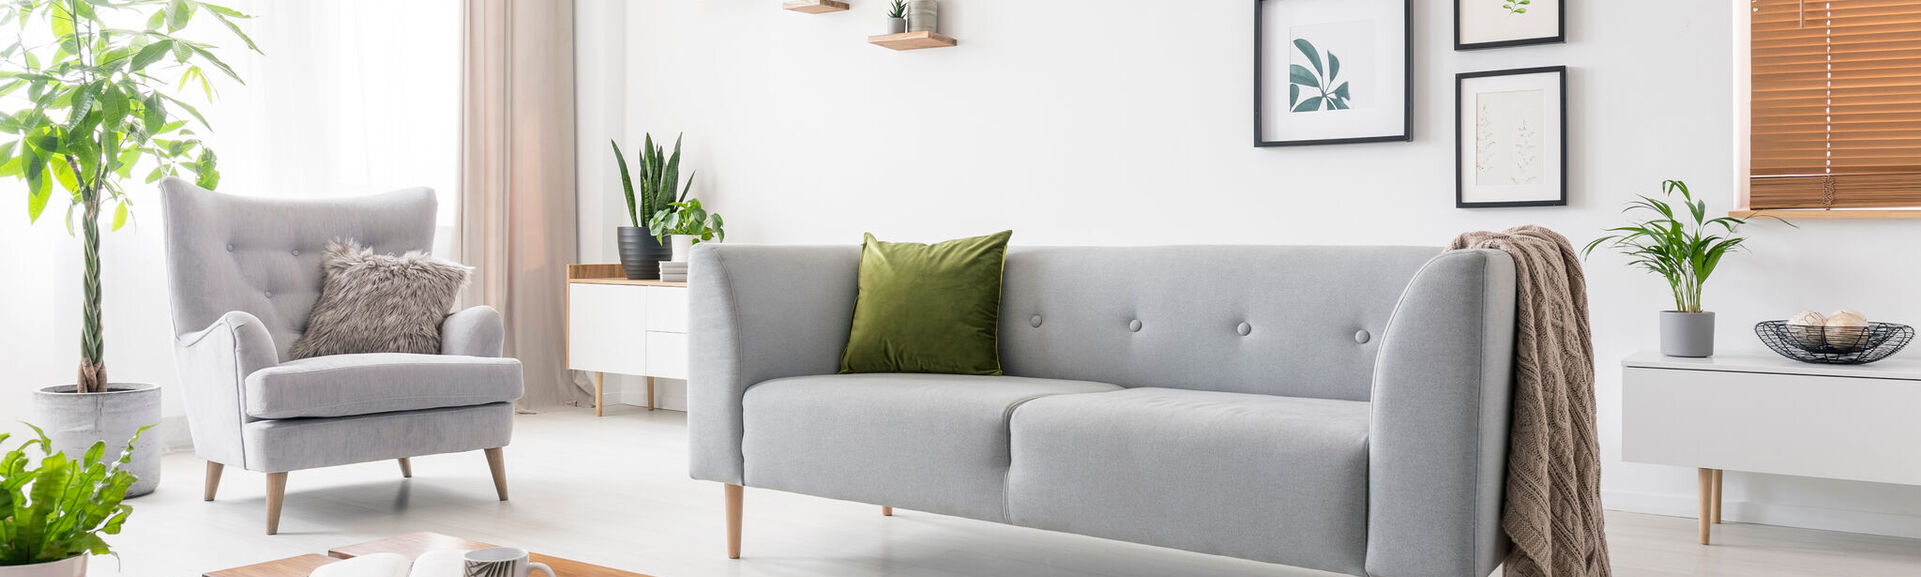  grey sofa with green cushion and blanket standing in white living room 